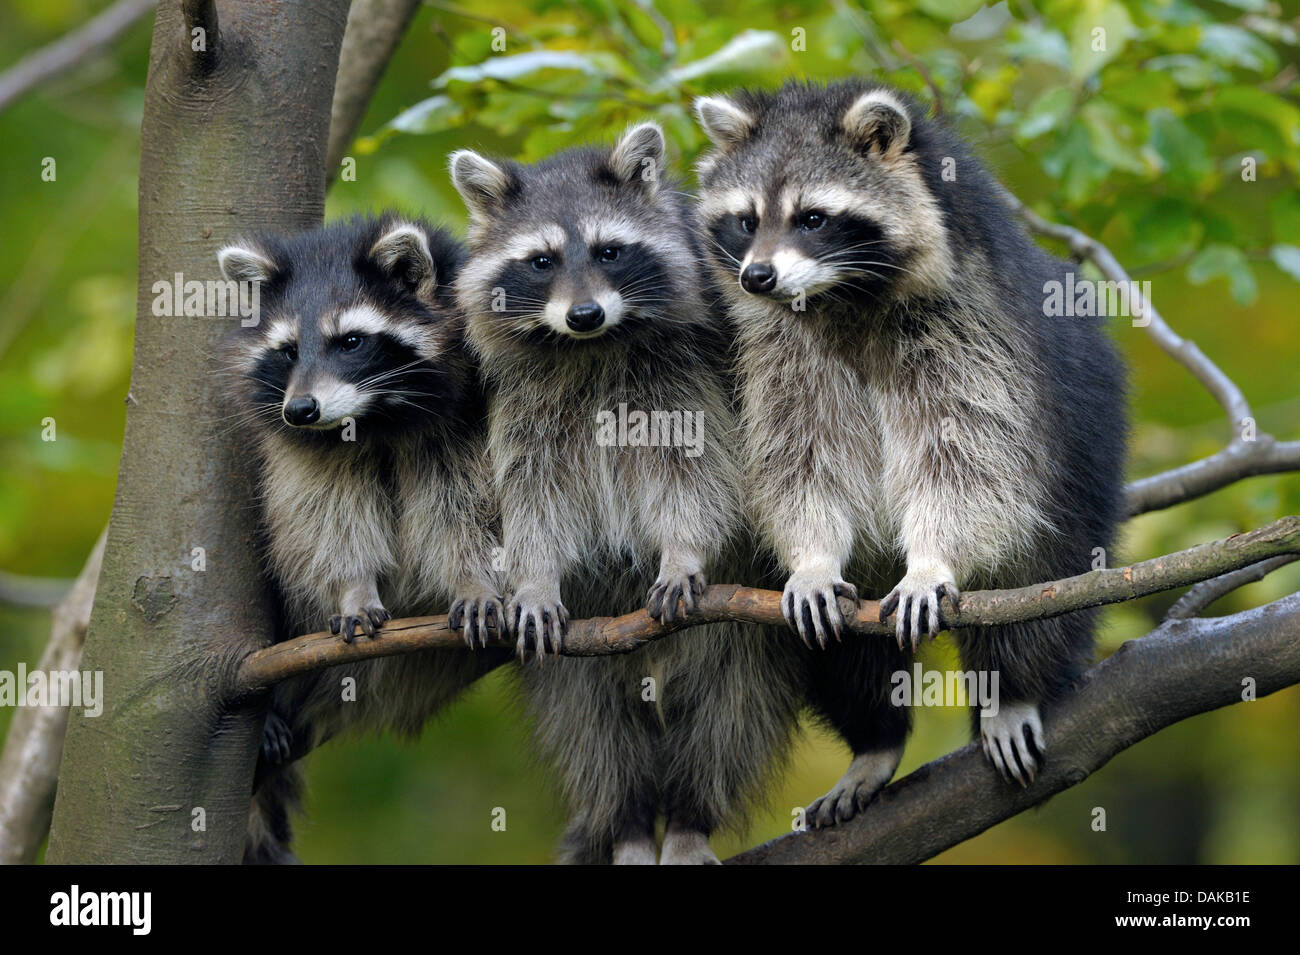 common raccoon (Procyon lotor), three raccoons sitting next to each other on a branch, Germany Stock Photo